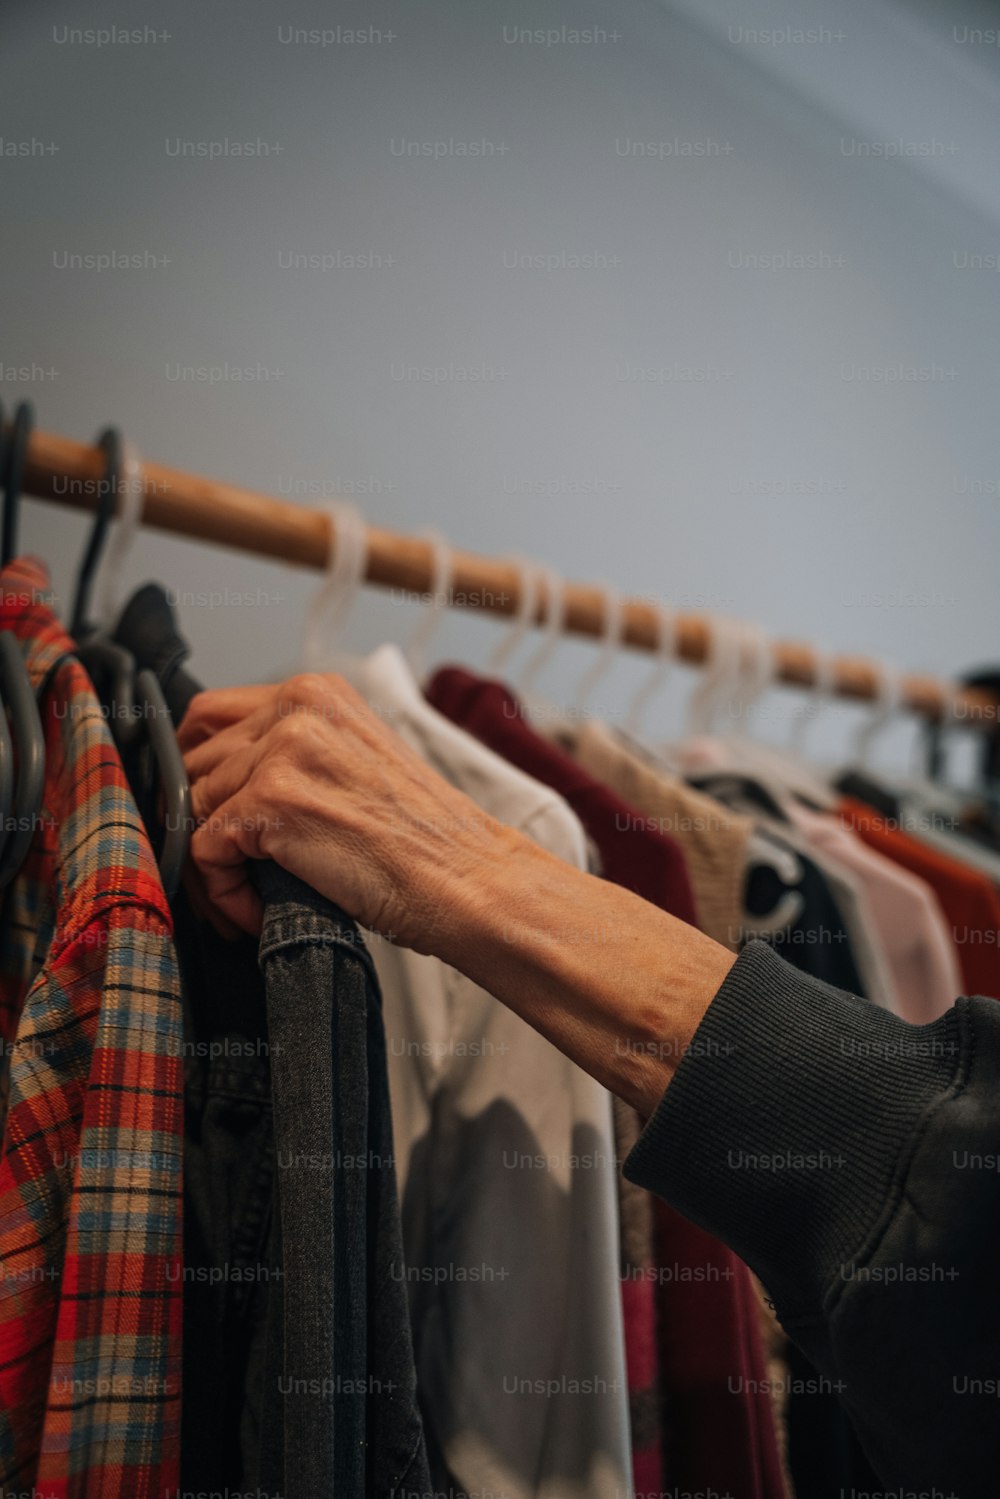 a woman's hand on a rack of clothes